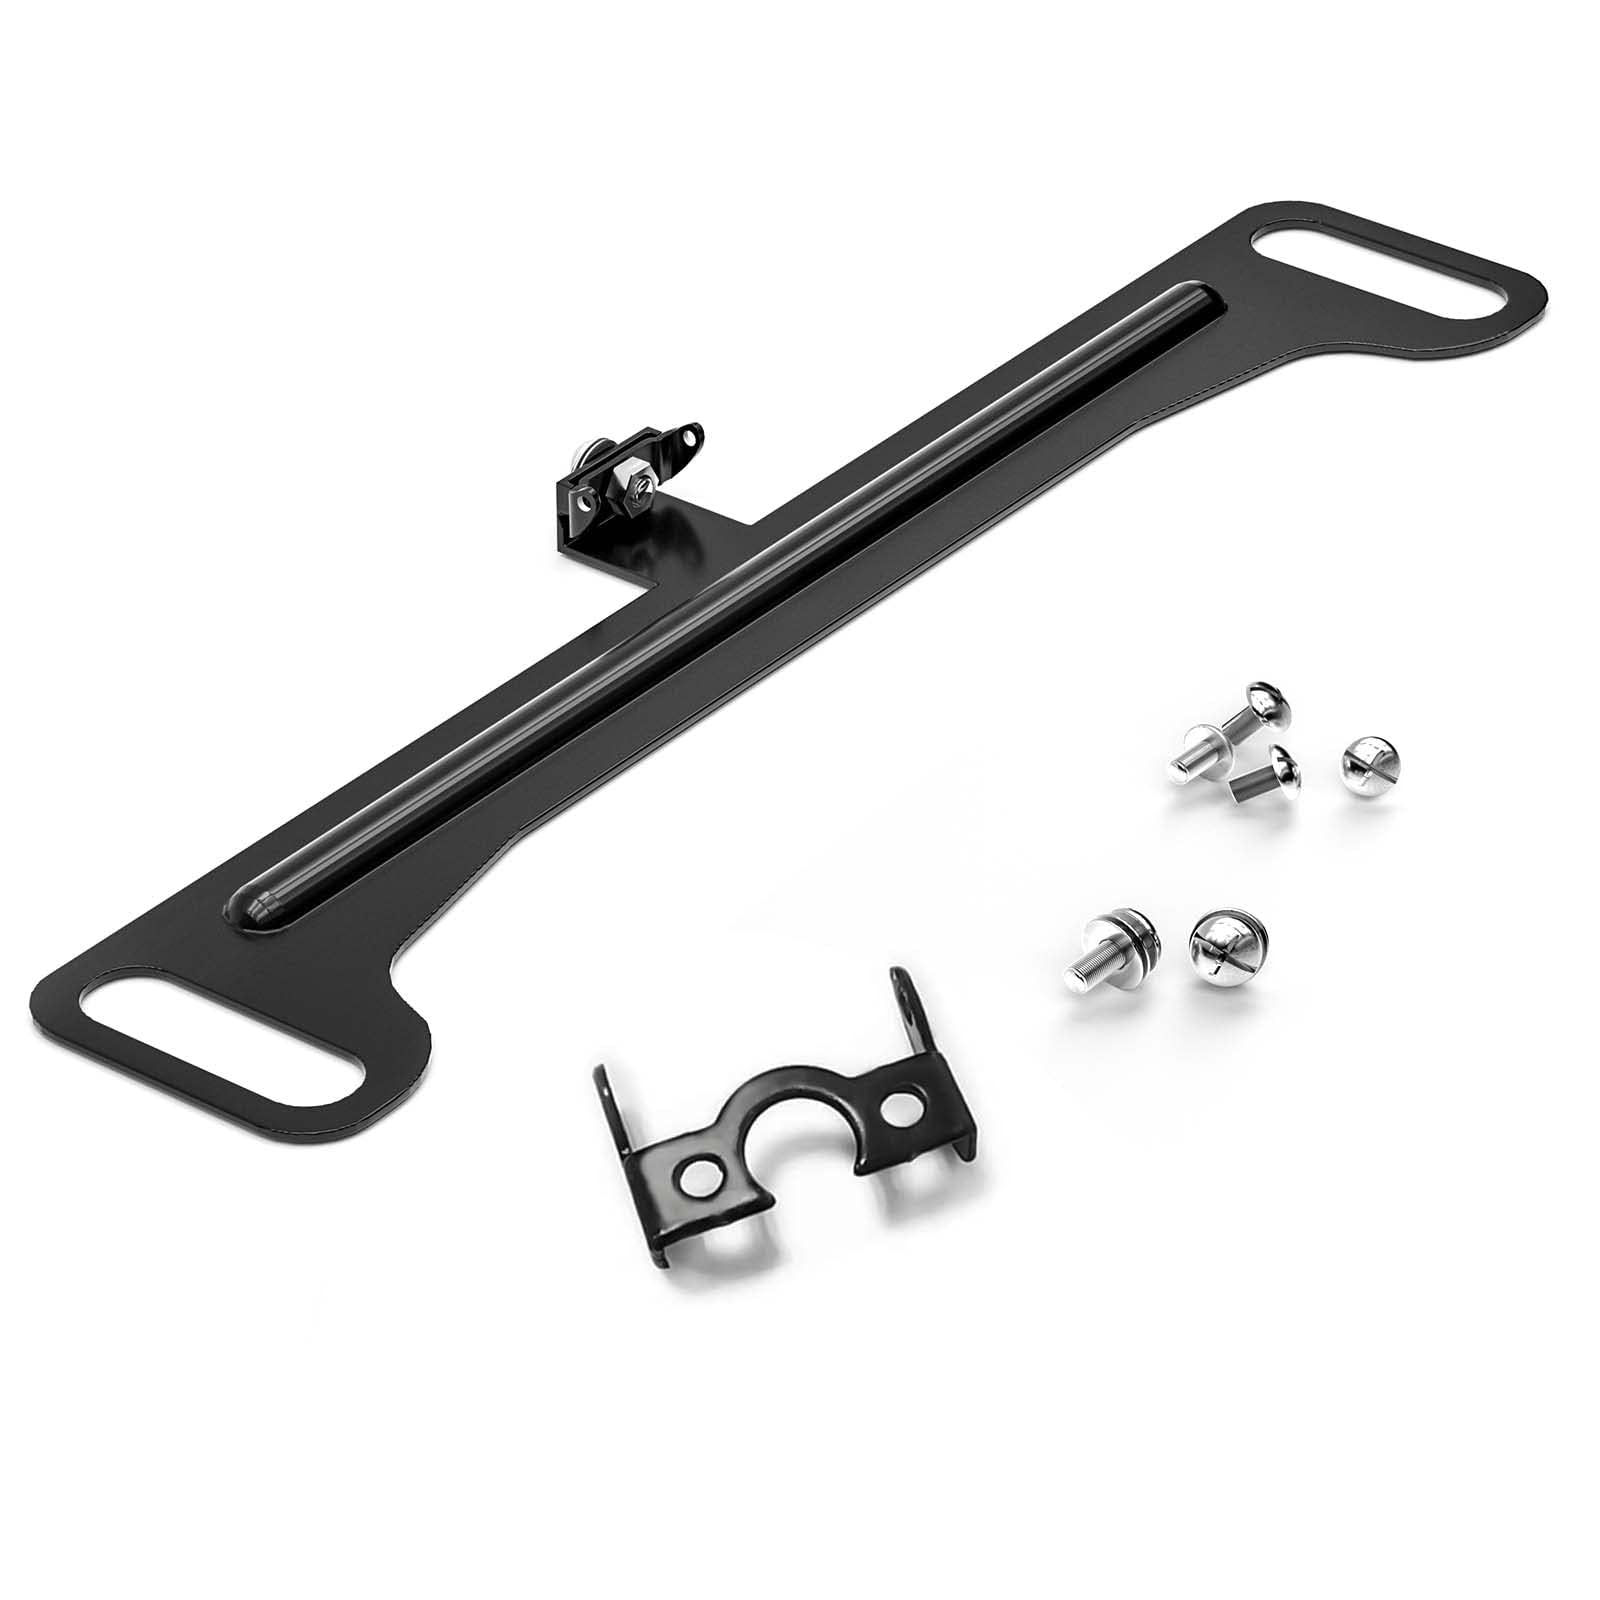 WOLFBOX Reverse Camera Plate Bracket for Easier Rear Cam Installation Accessory WOLFBOX   